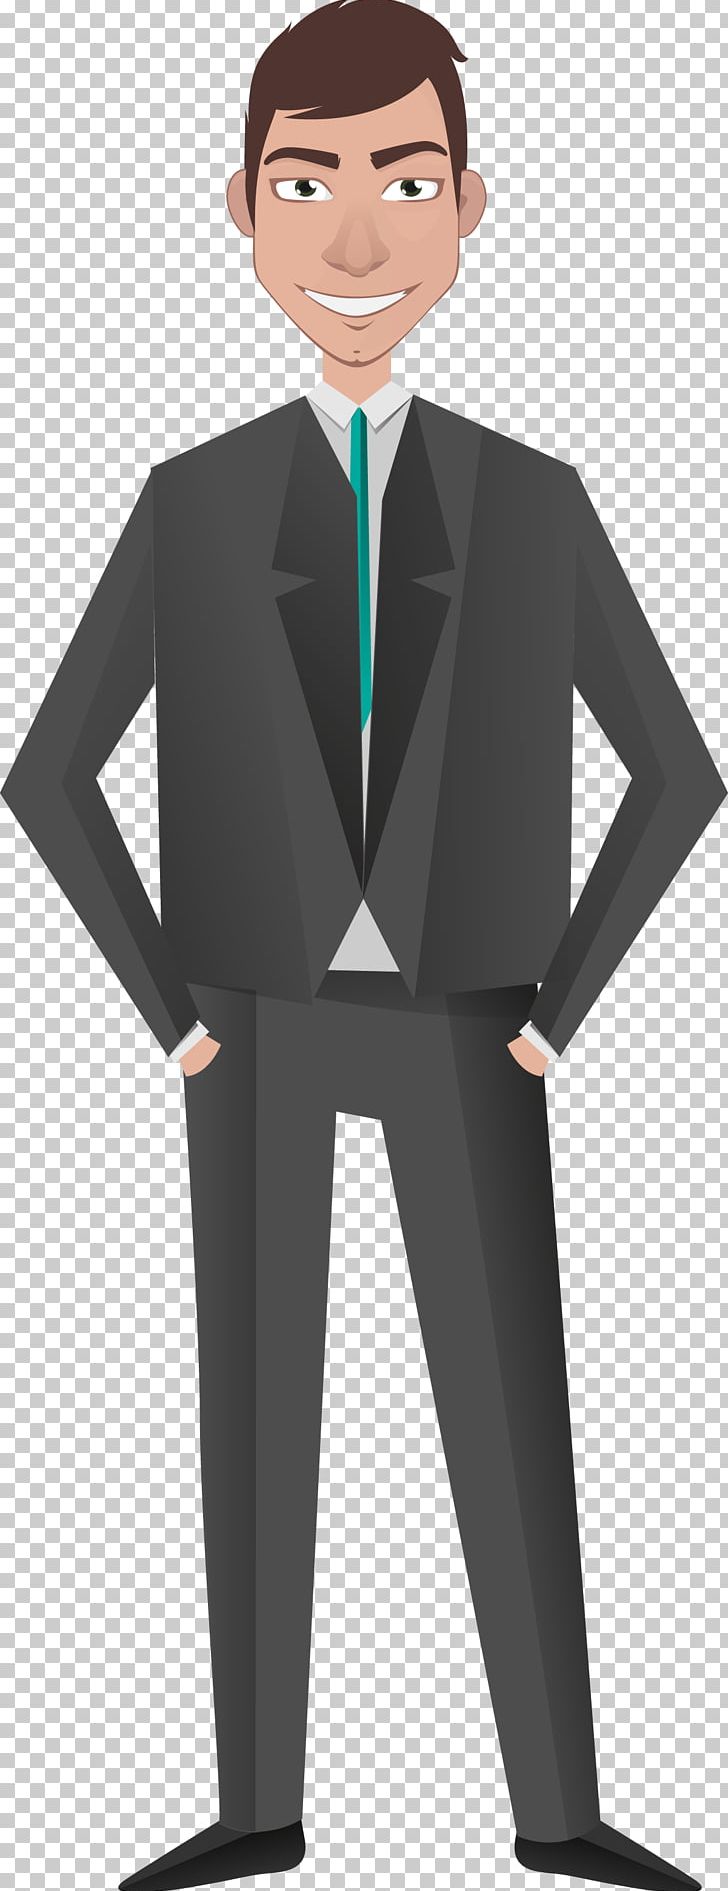 Character Cartoon Illustration PNG, Clipart, Business, Business Affairs, Business Man, Cartoon, Cartoon Characters Free PNG Download